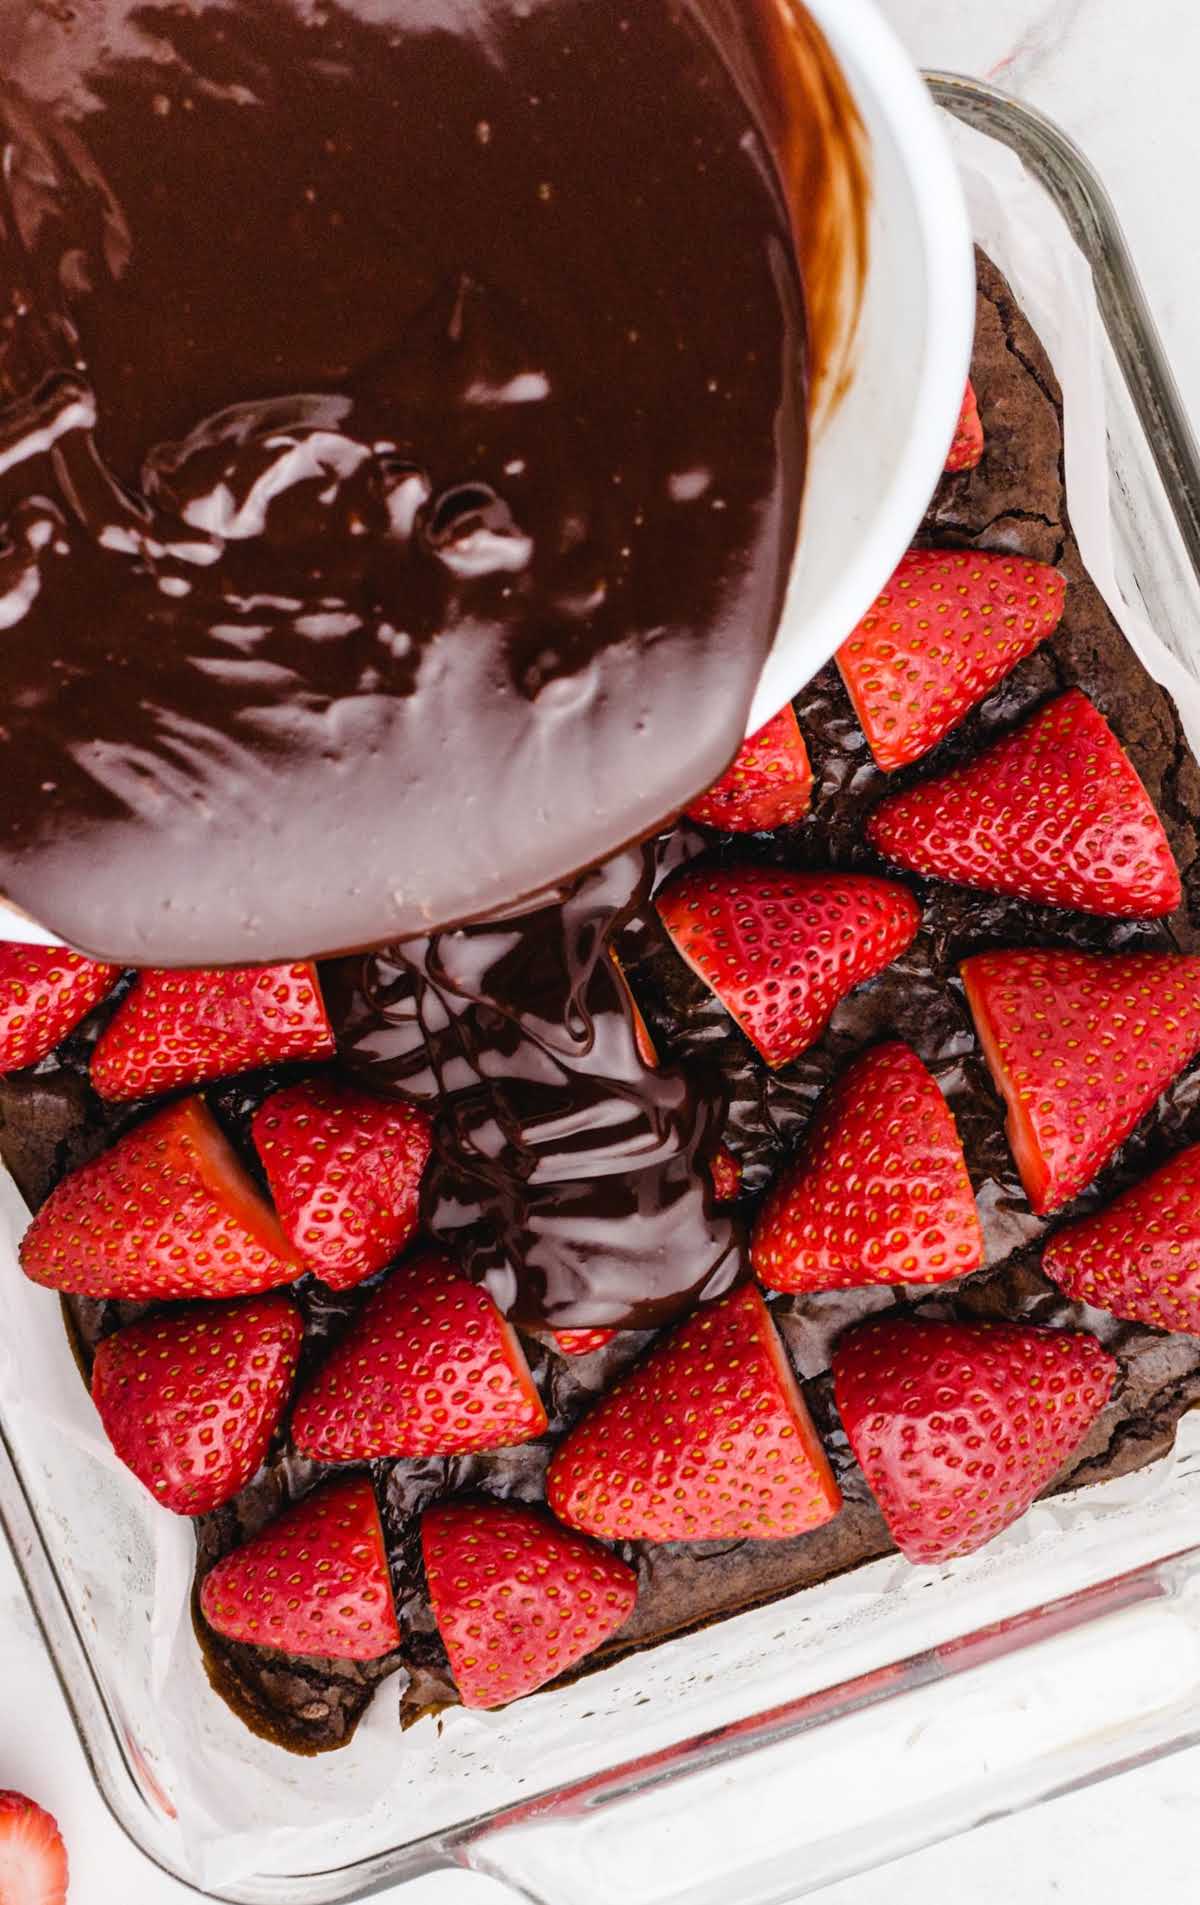 chocolate ganache being poured over the strawberries in a baking dish